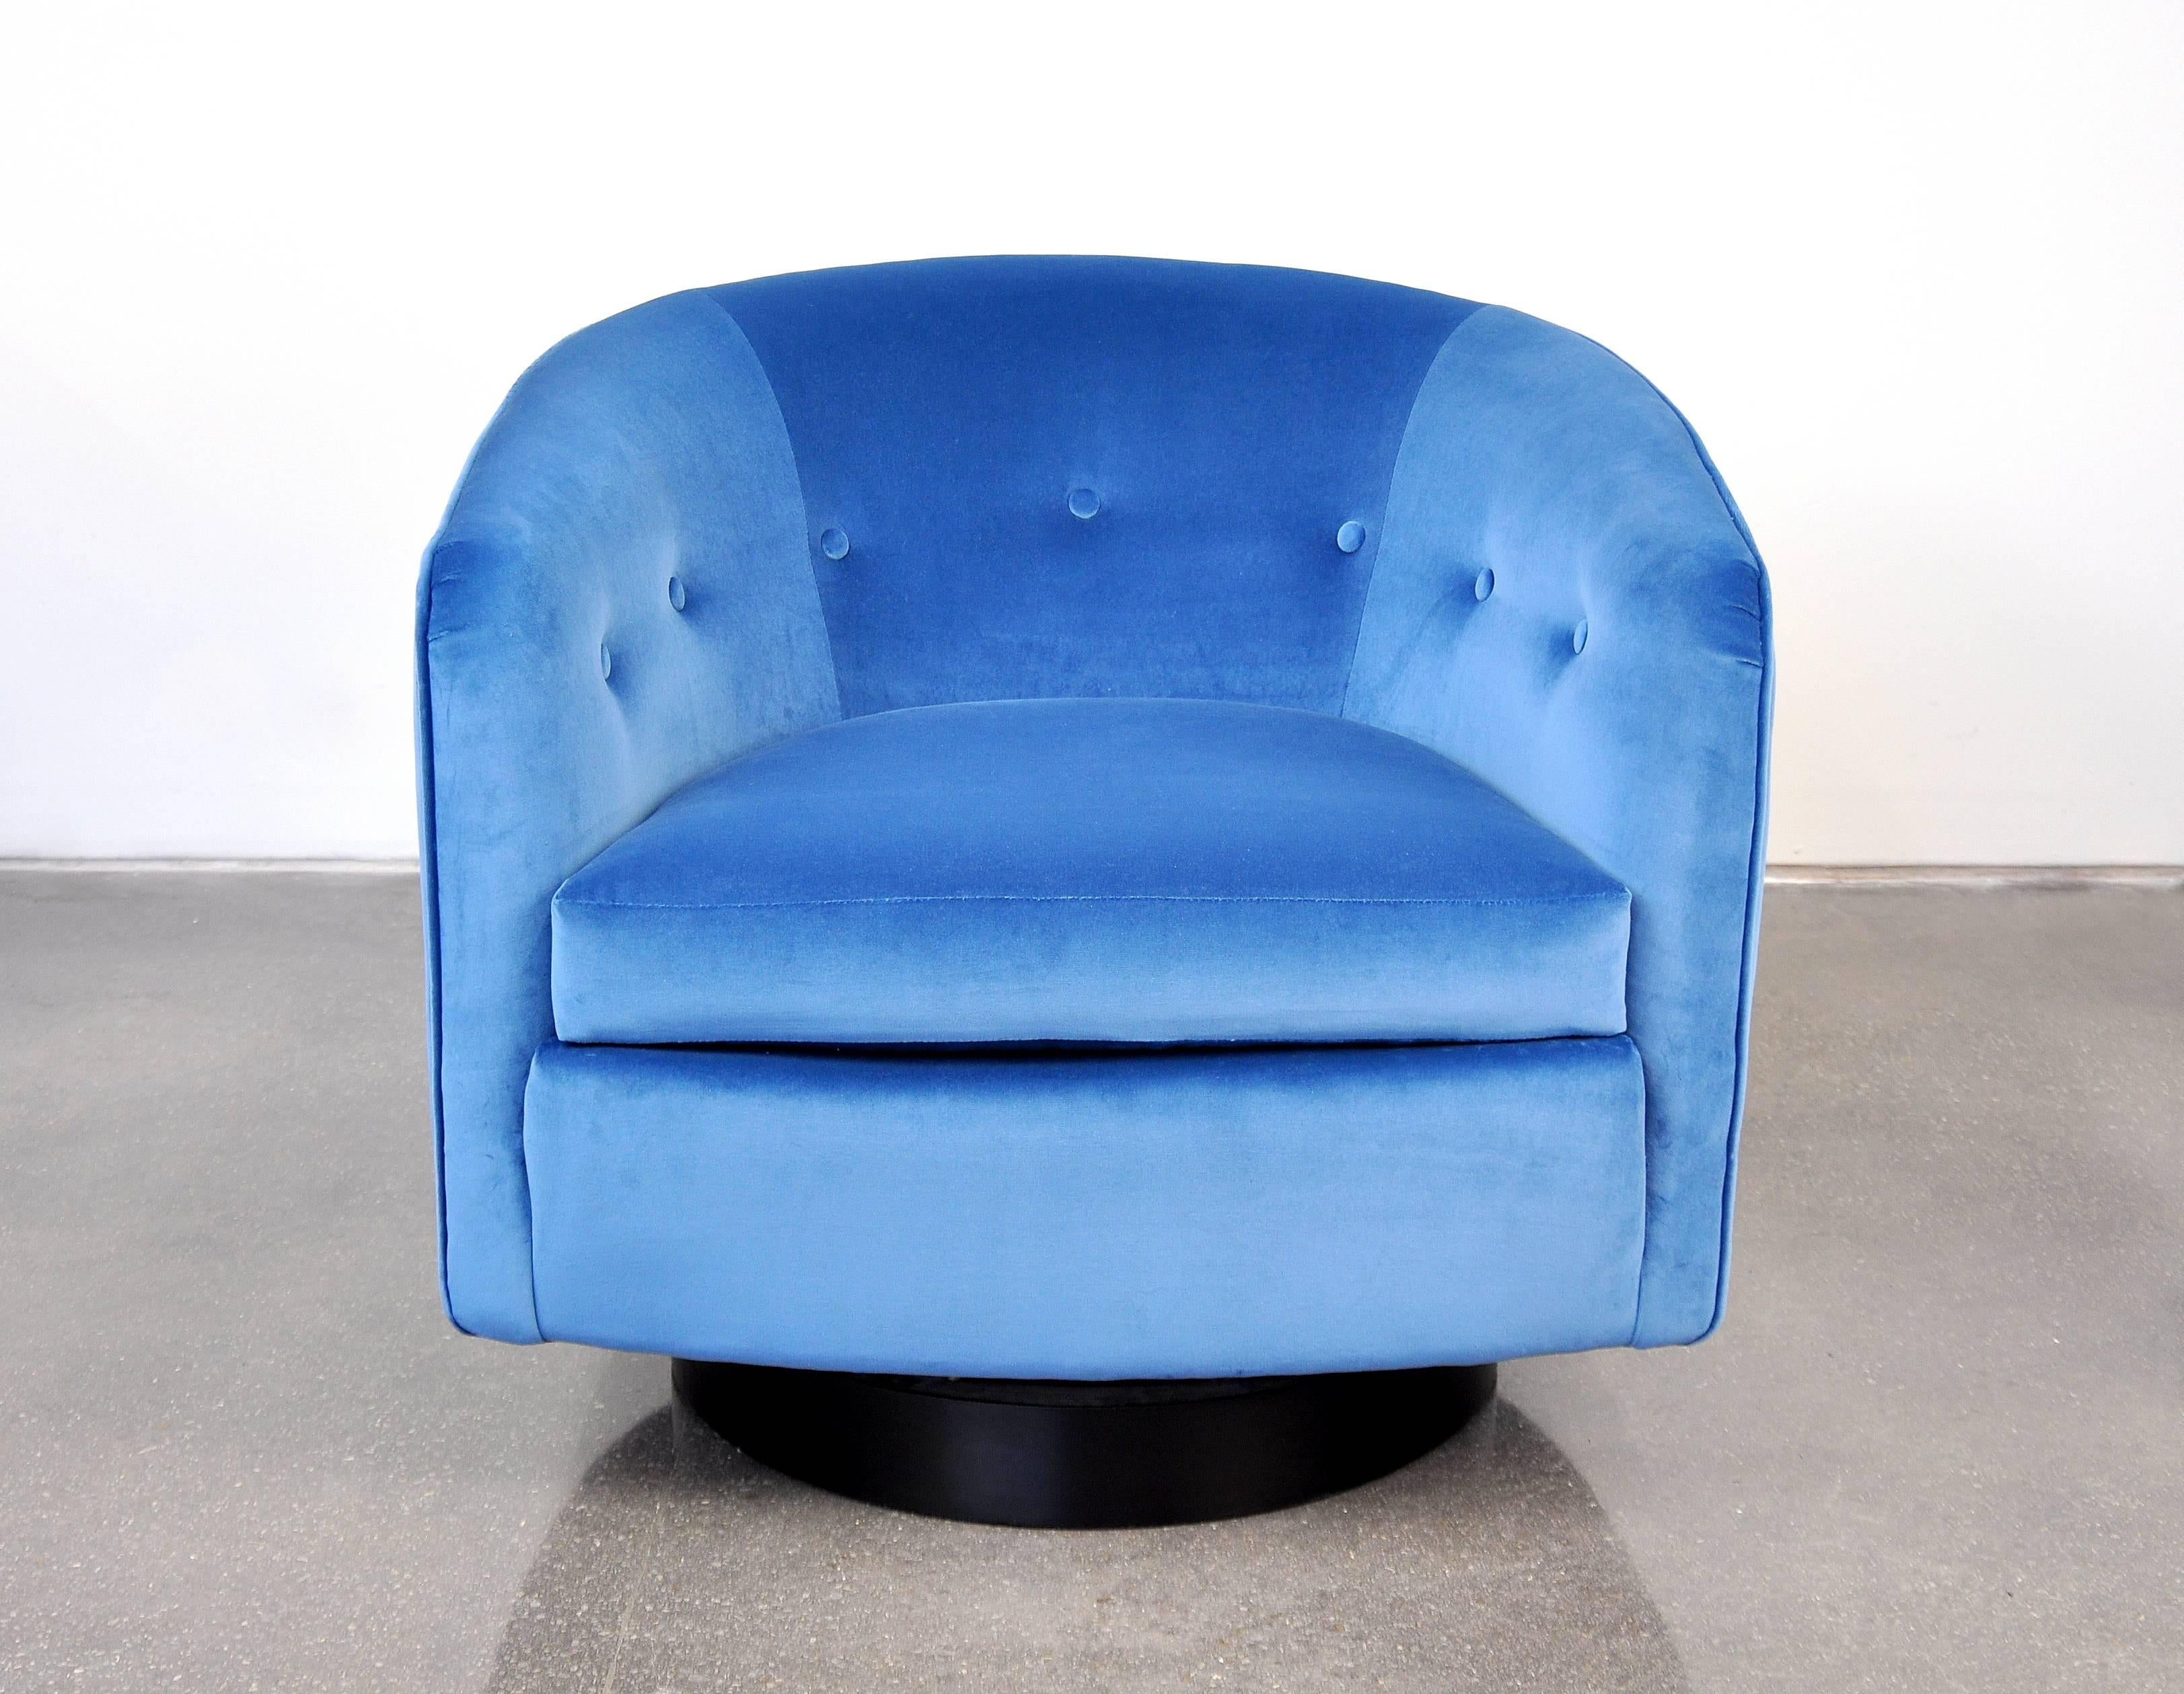 A vintage Mid-Century Modern barrel back club or tub chair, fully restored and reupholstered in a gorgeous pastel spring sky, sapphire blue velvet, featuring a round wood base with black finish and swivelling mechanism. A very comfortable armchair